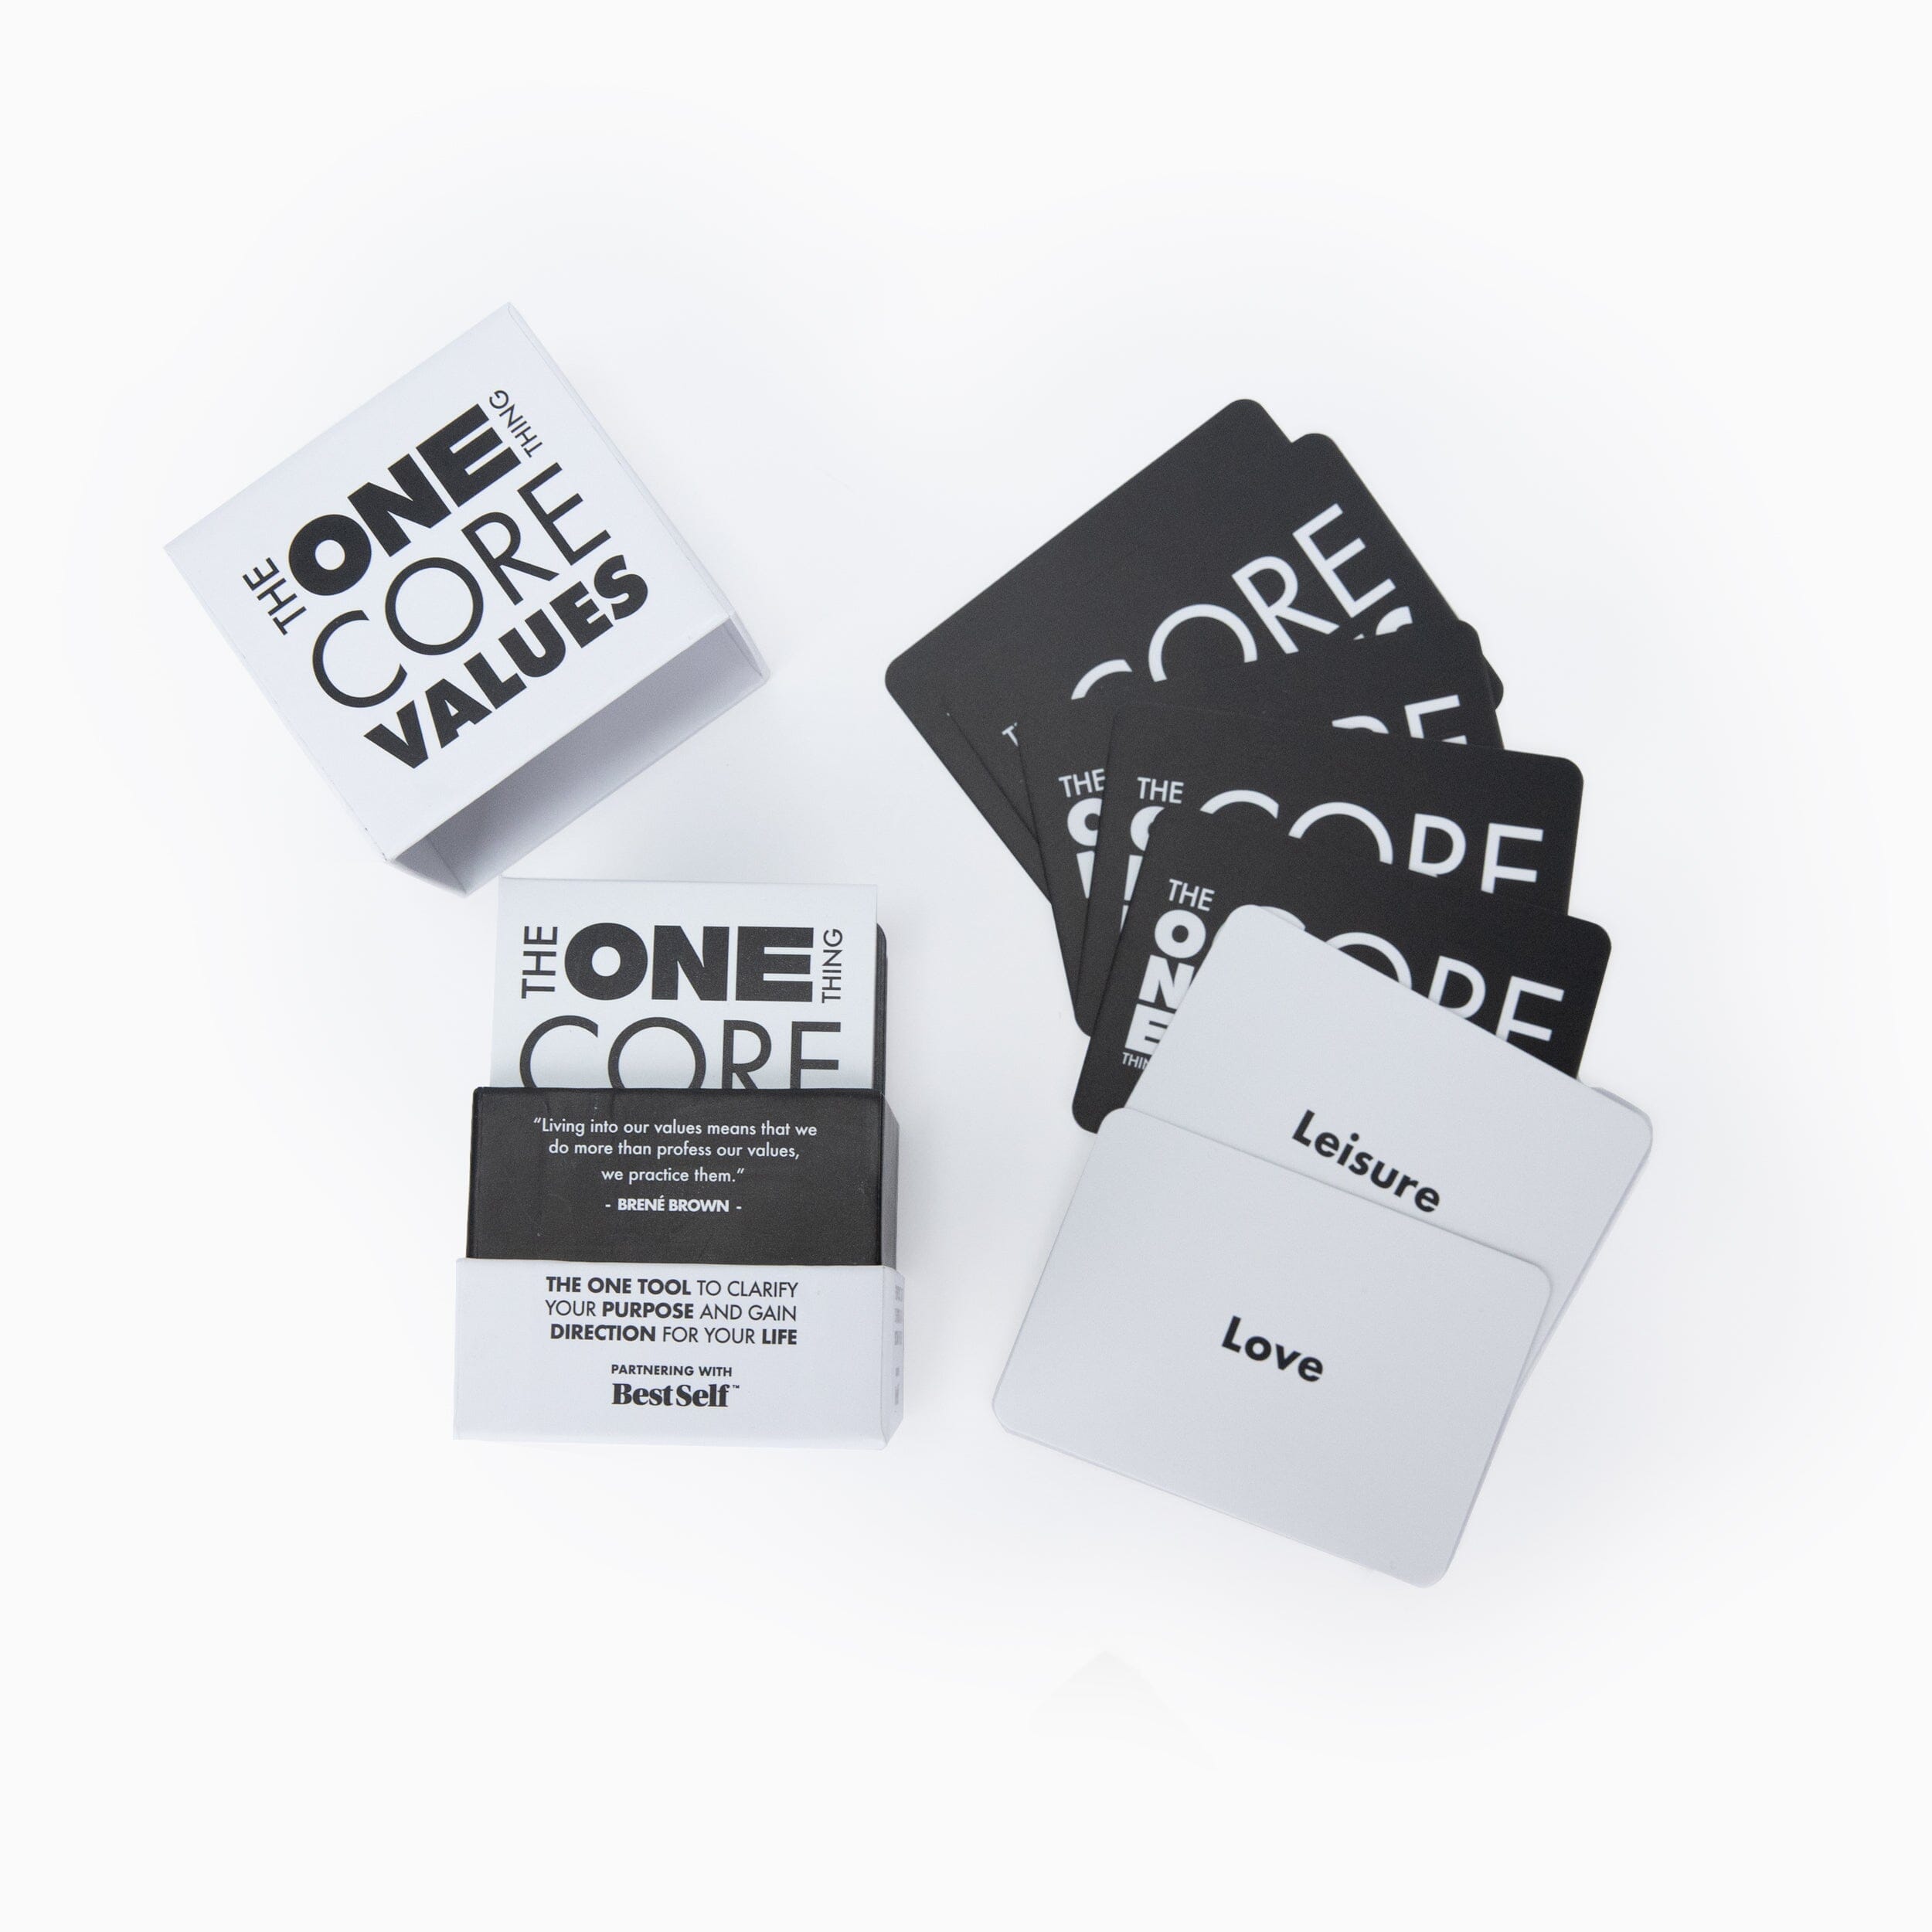 The One Thing - Core Values Deck Card Deck Personal Growth